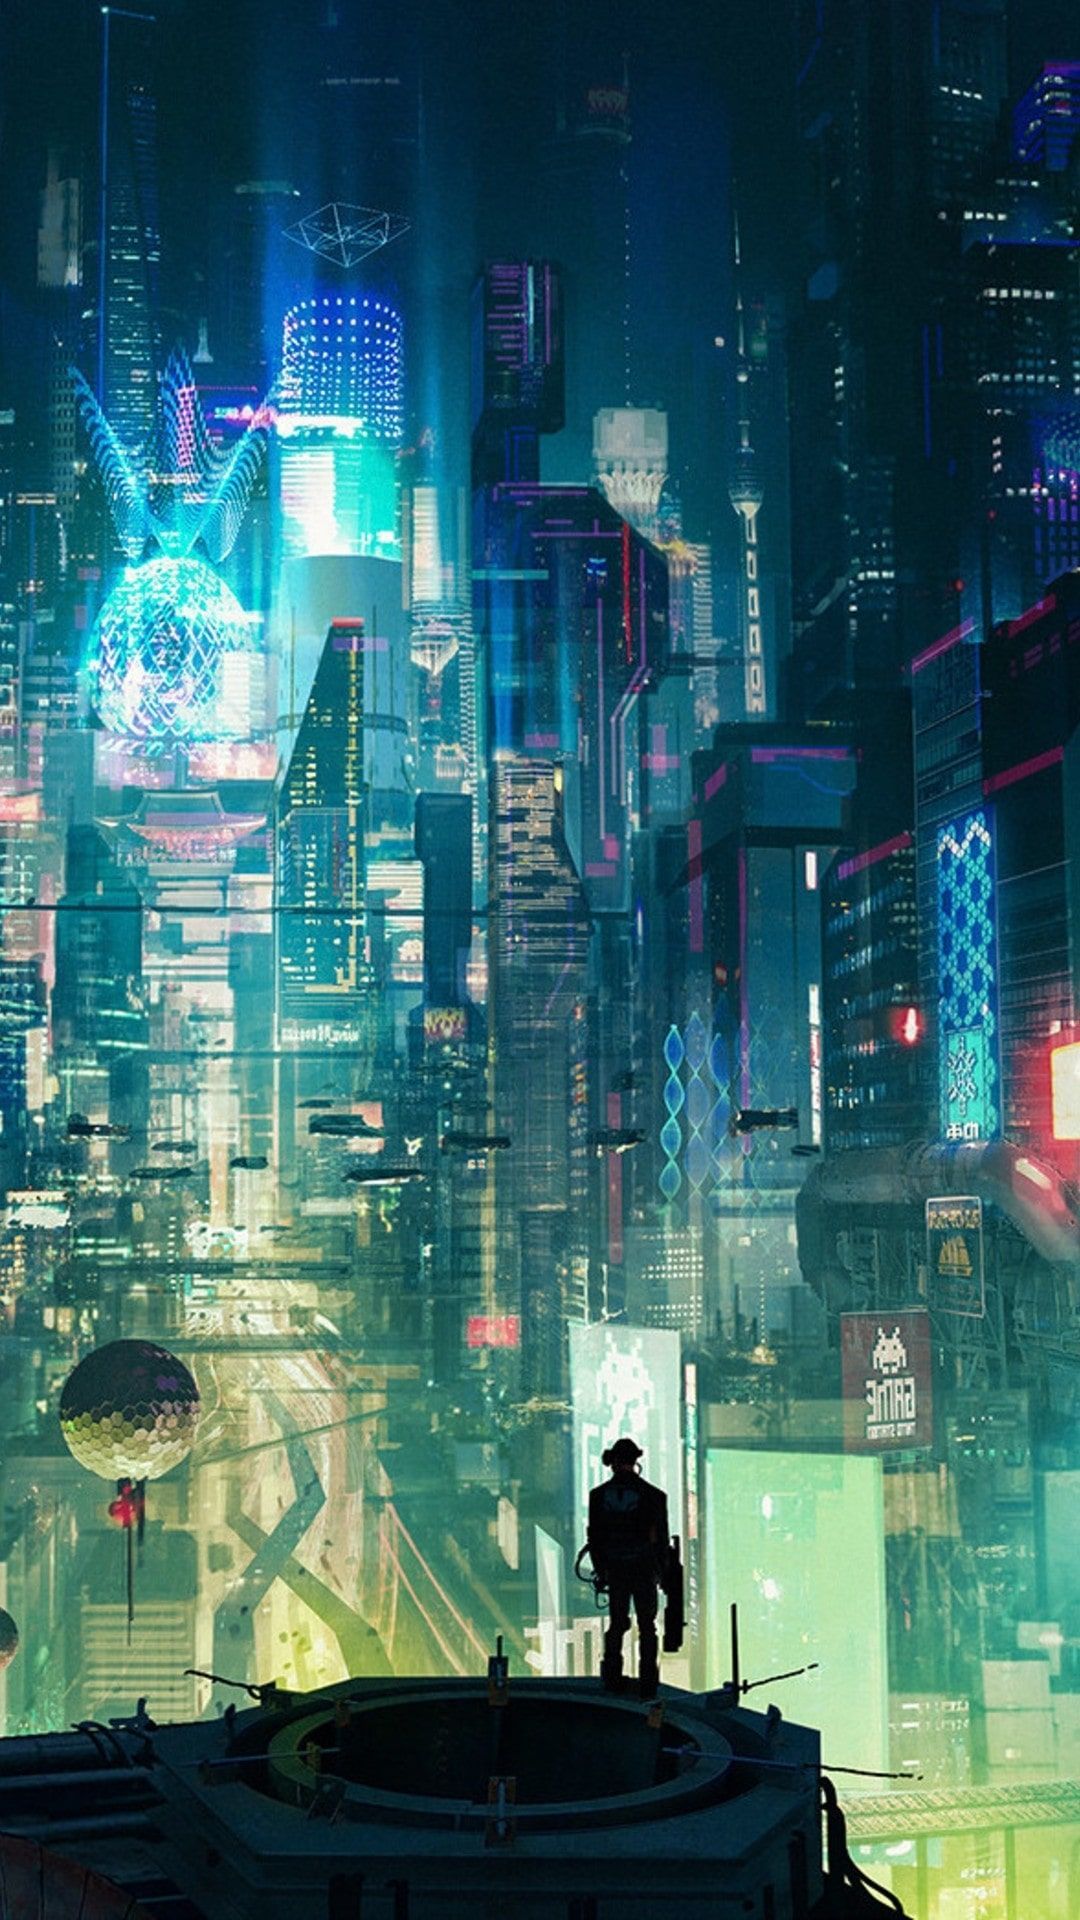 A city with neon lights and people standing on top of it - Cyberpunk